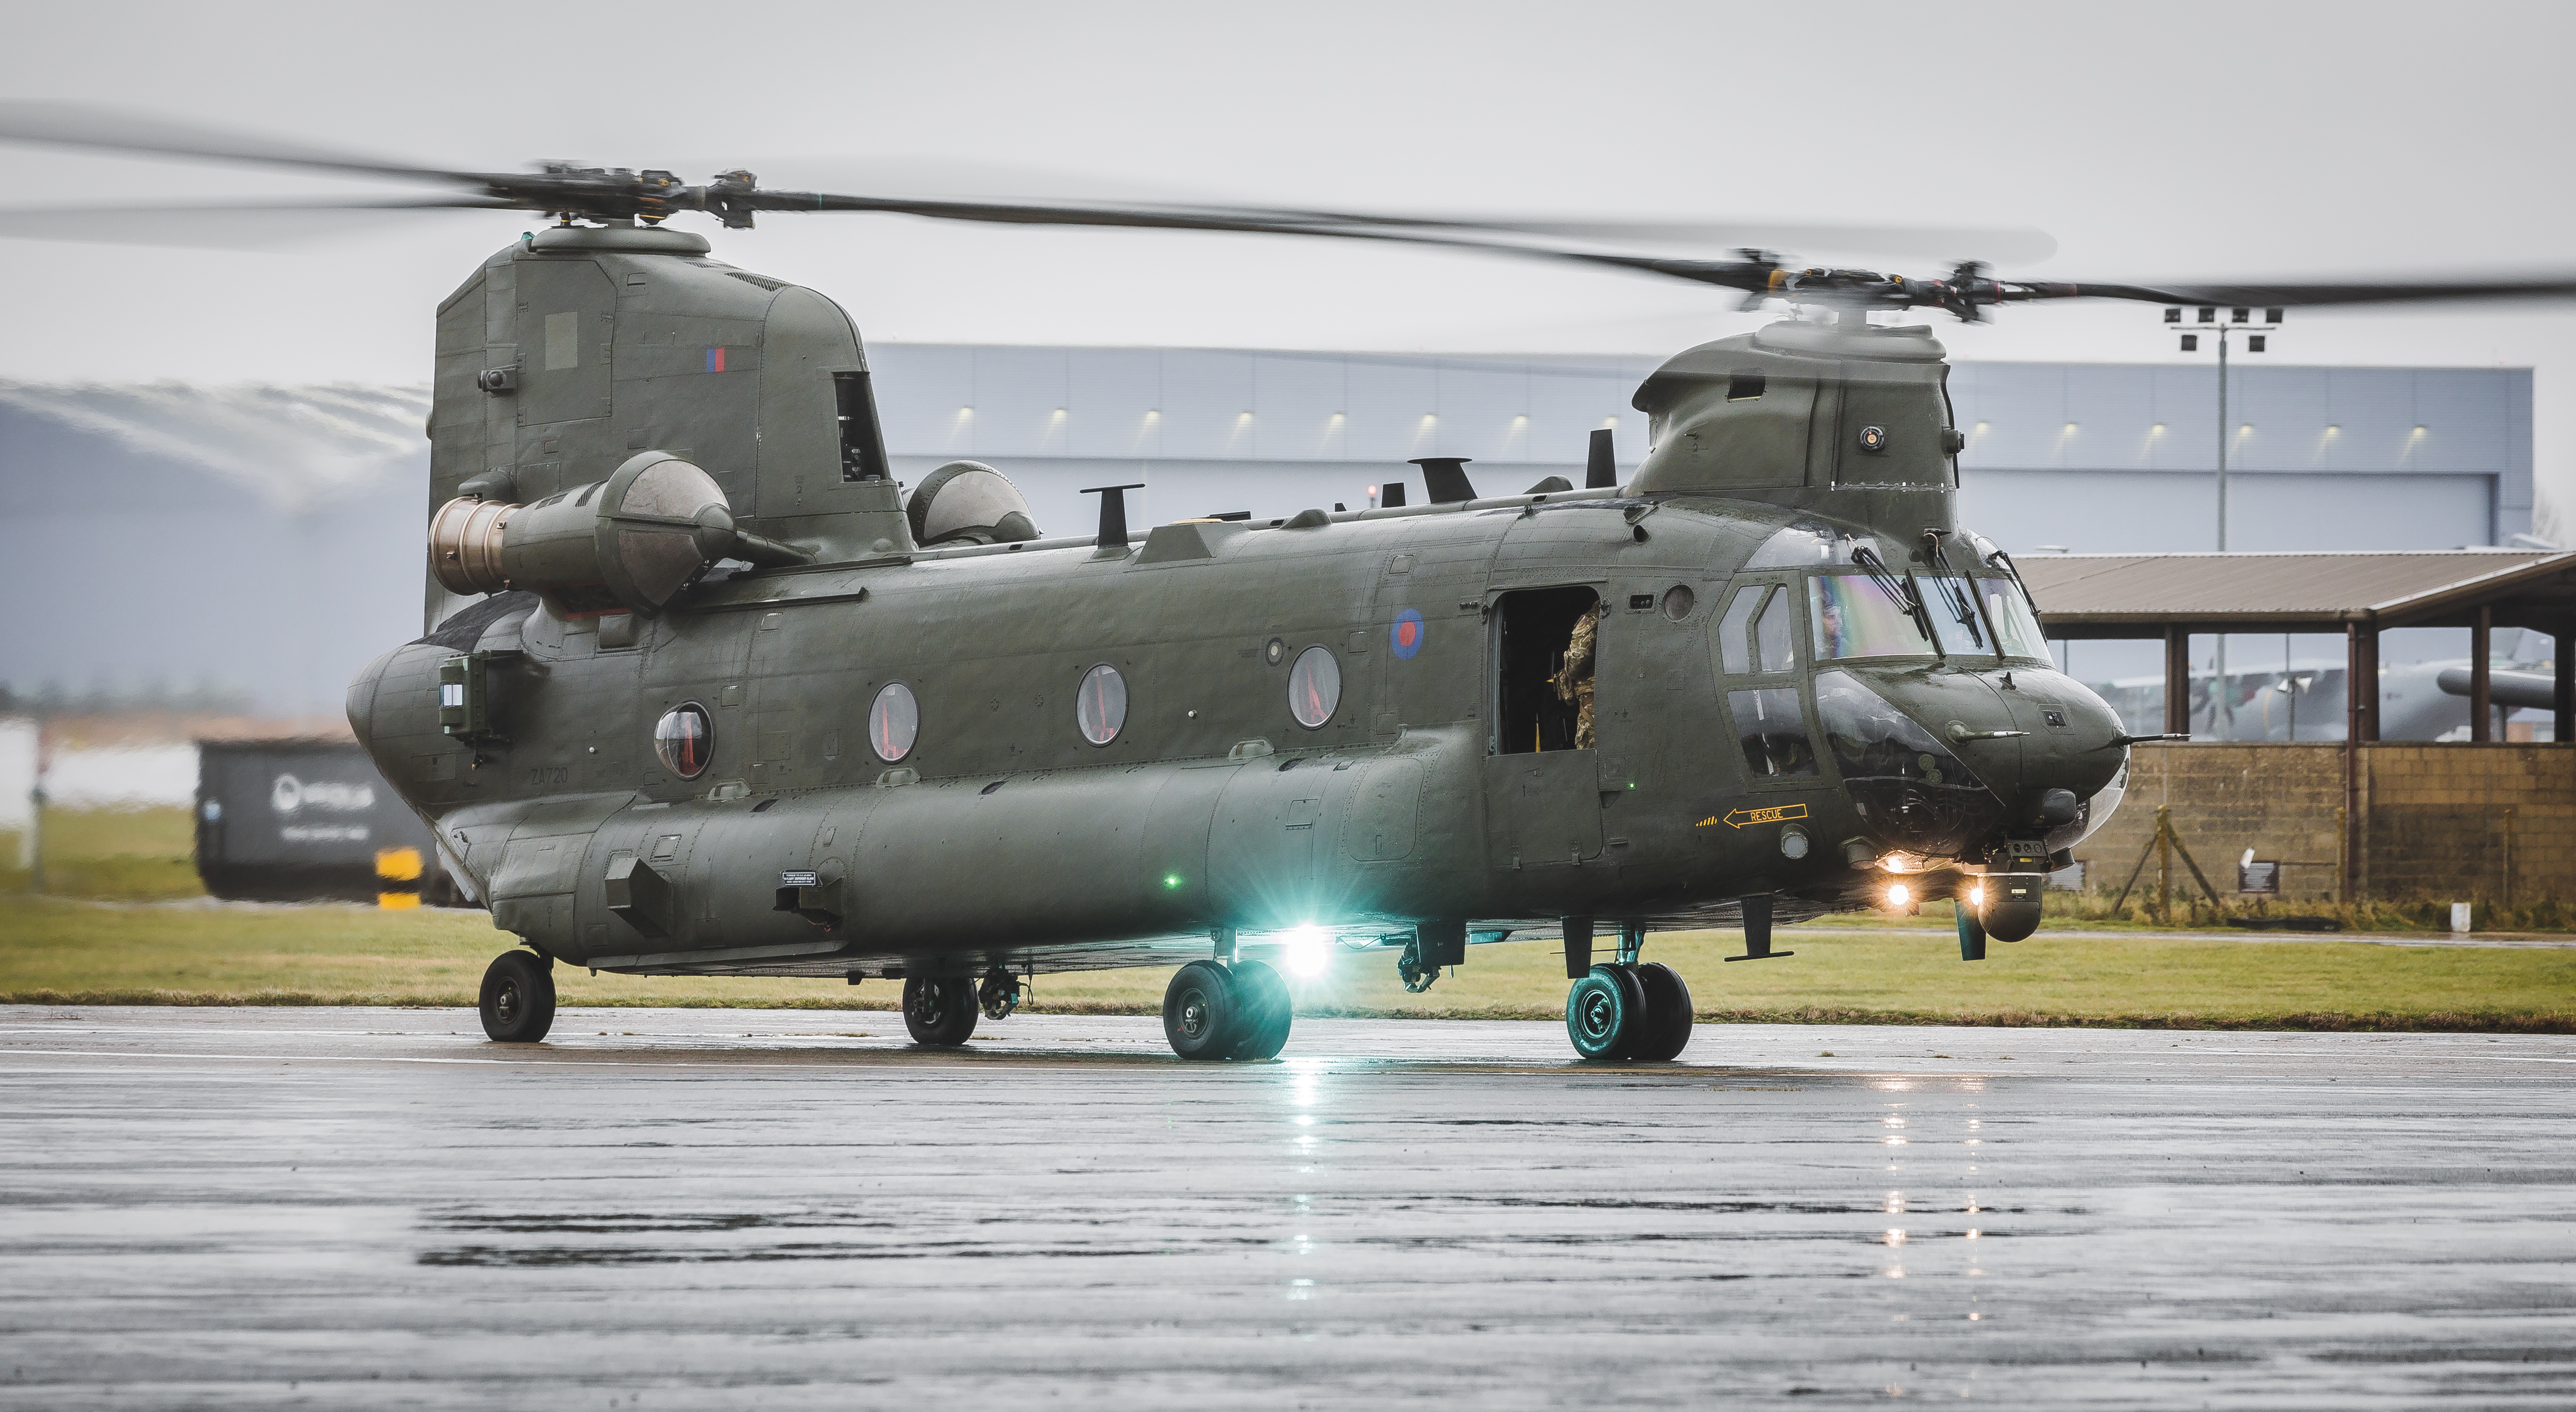 Chinook helicopter on the runway.